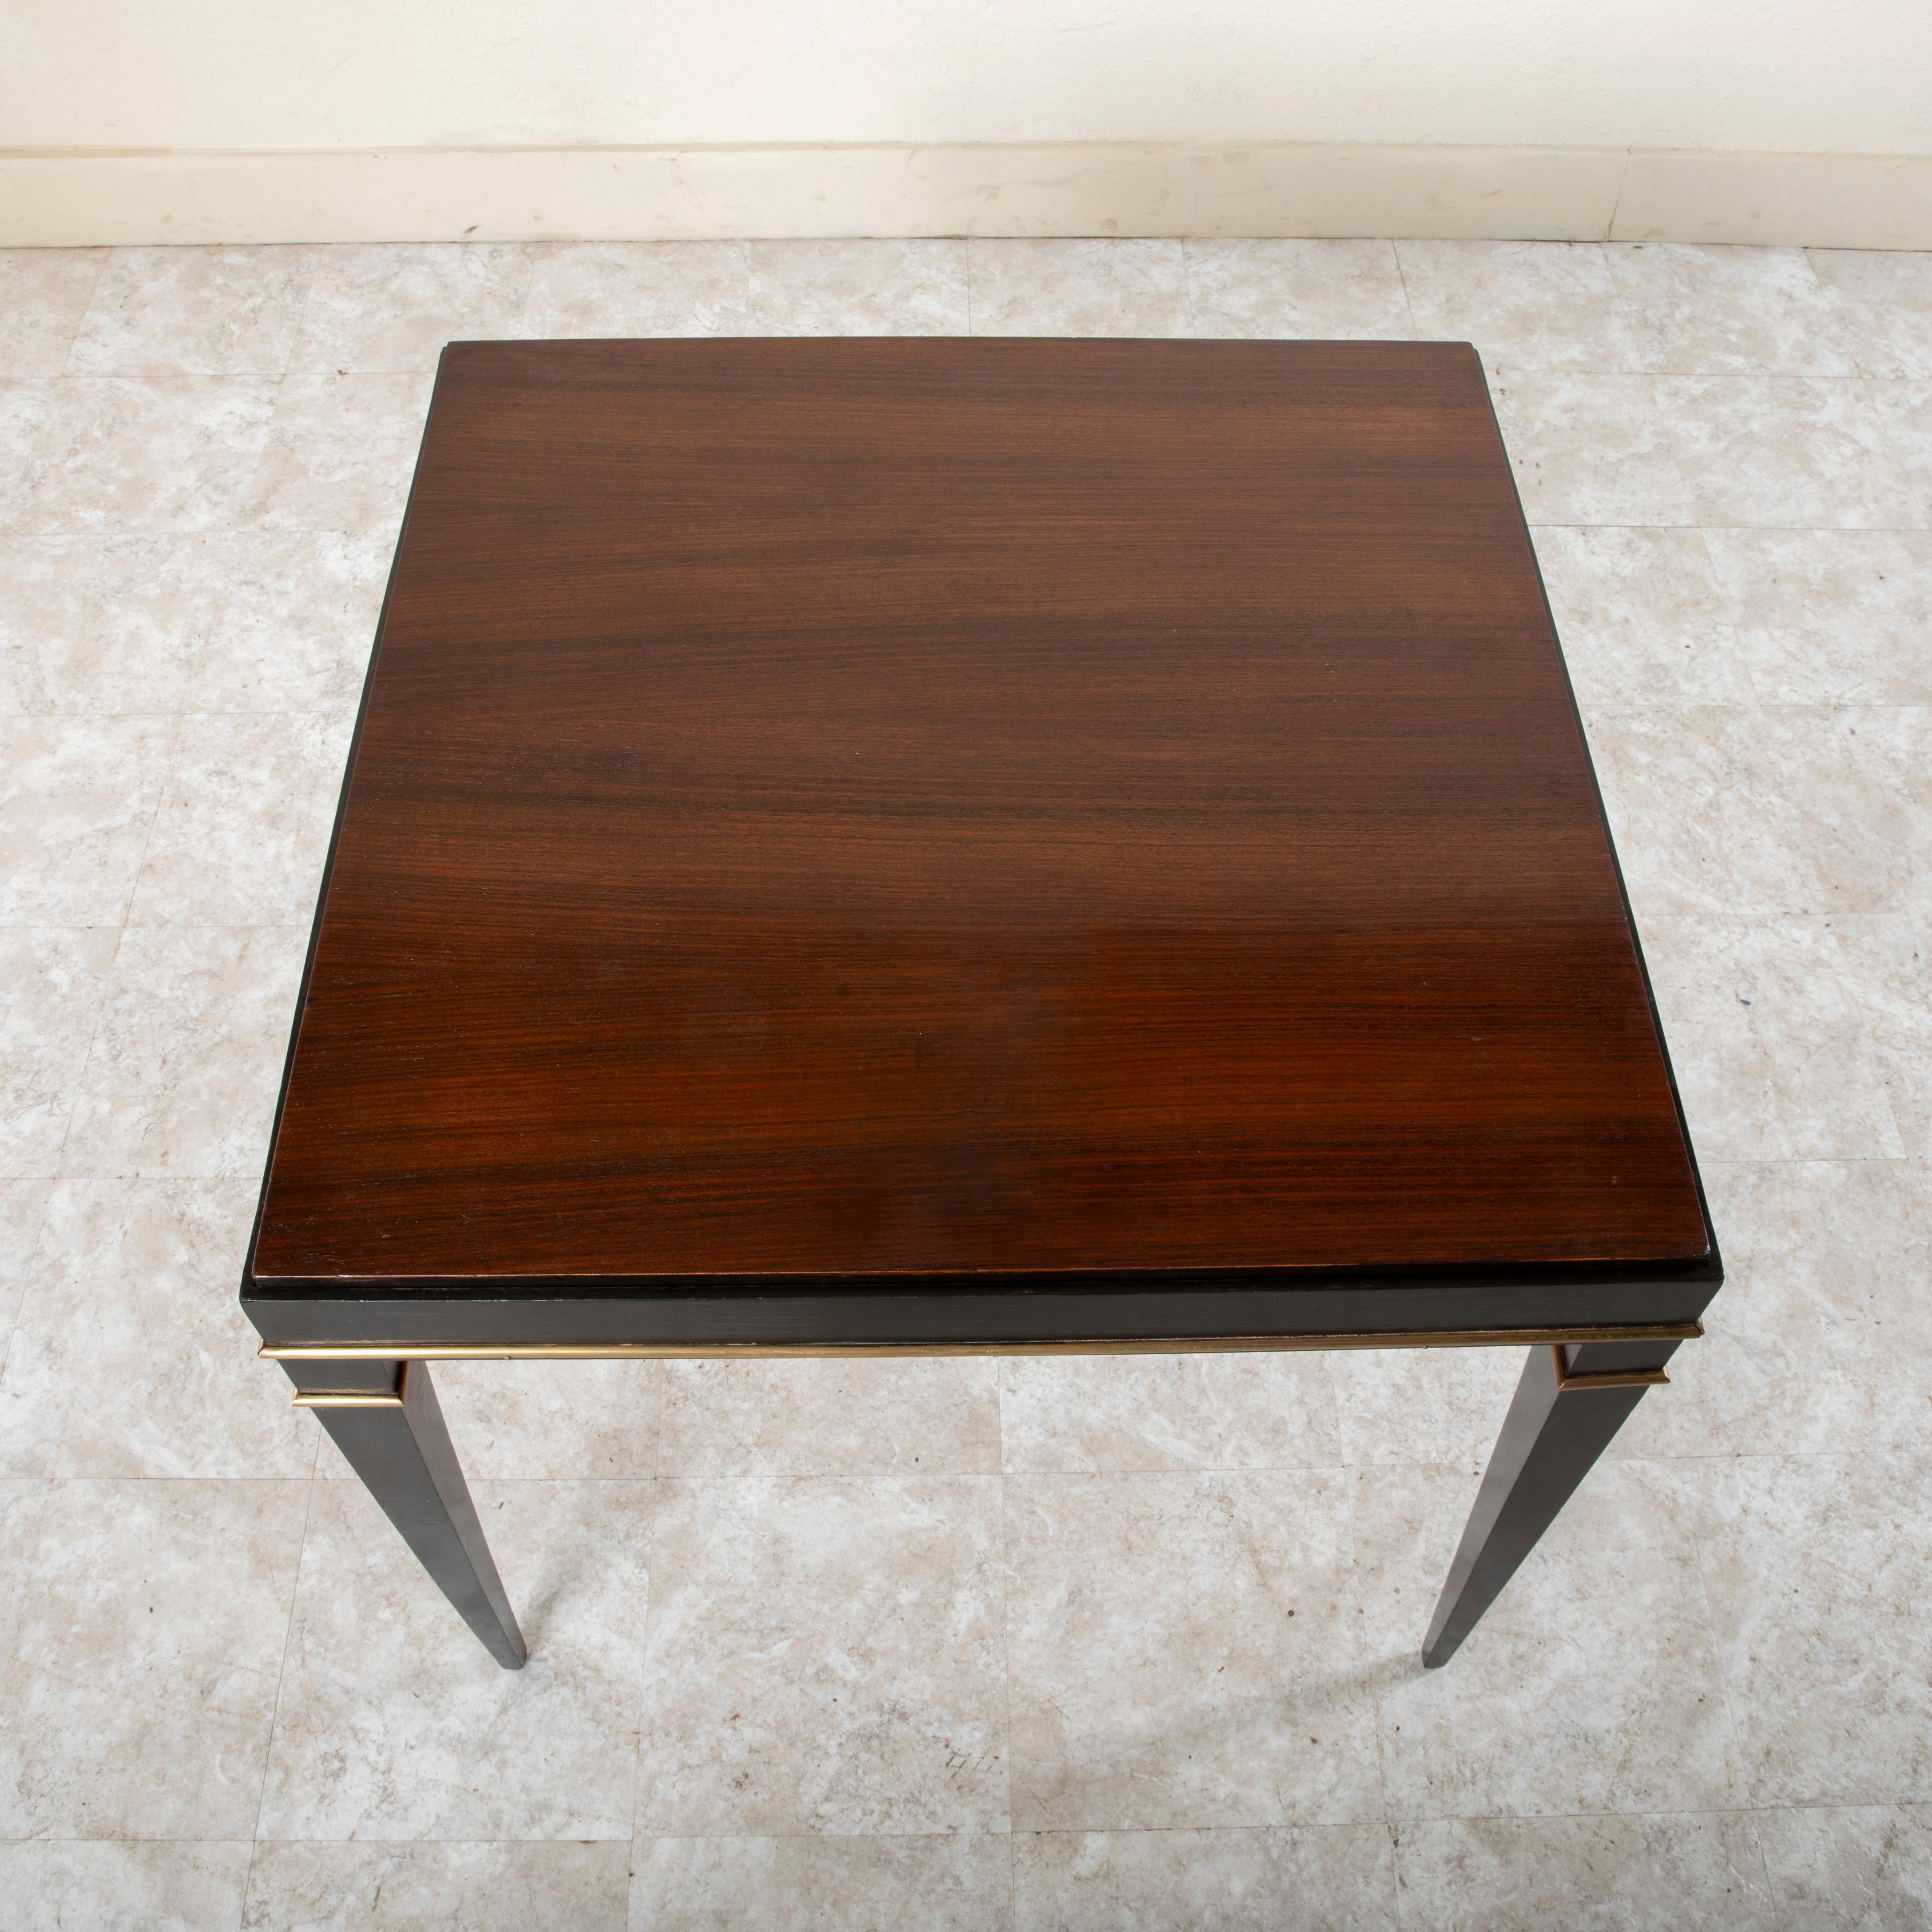 Mid-20th Century French Ebony and Palisander Game Table, Reversible Top  For Sale 3